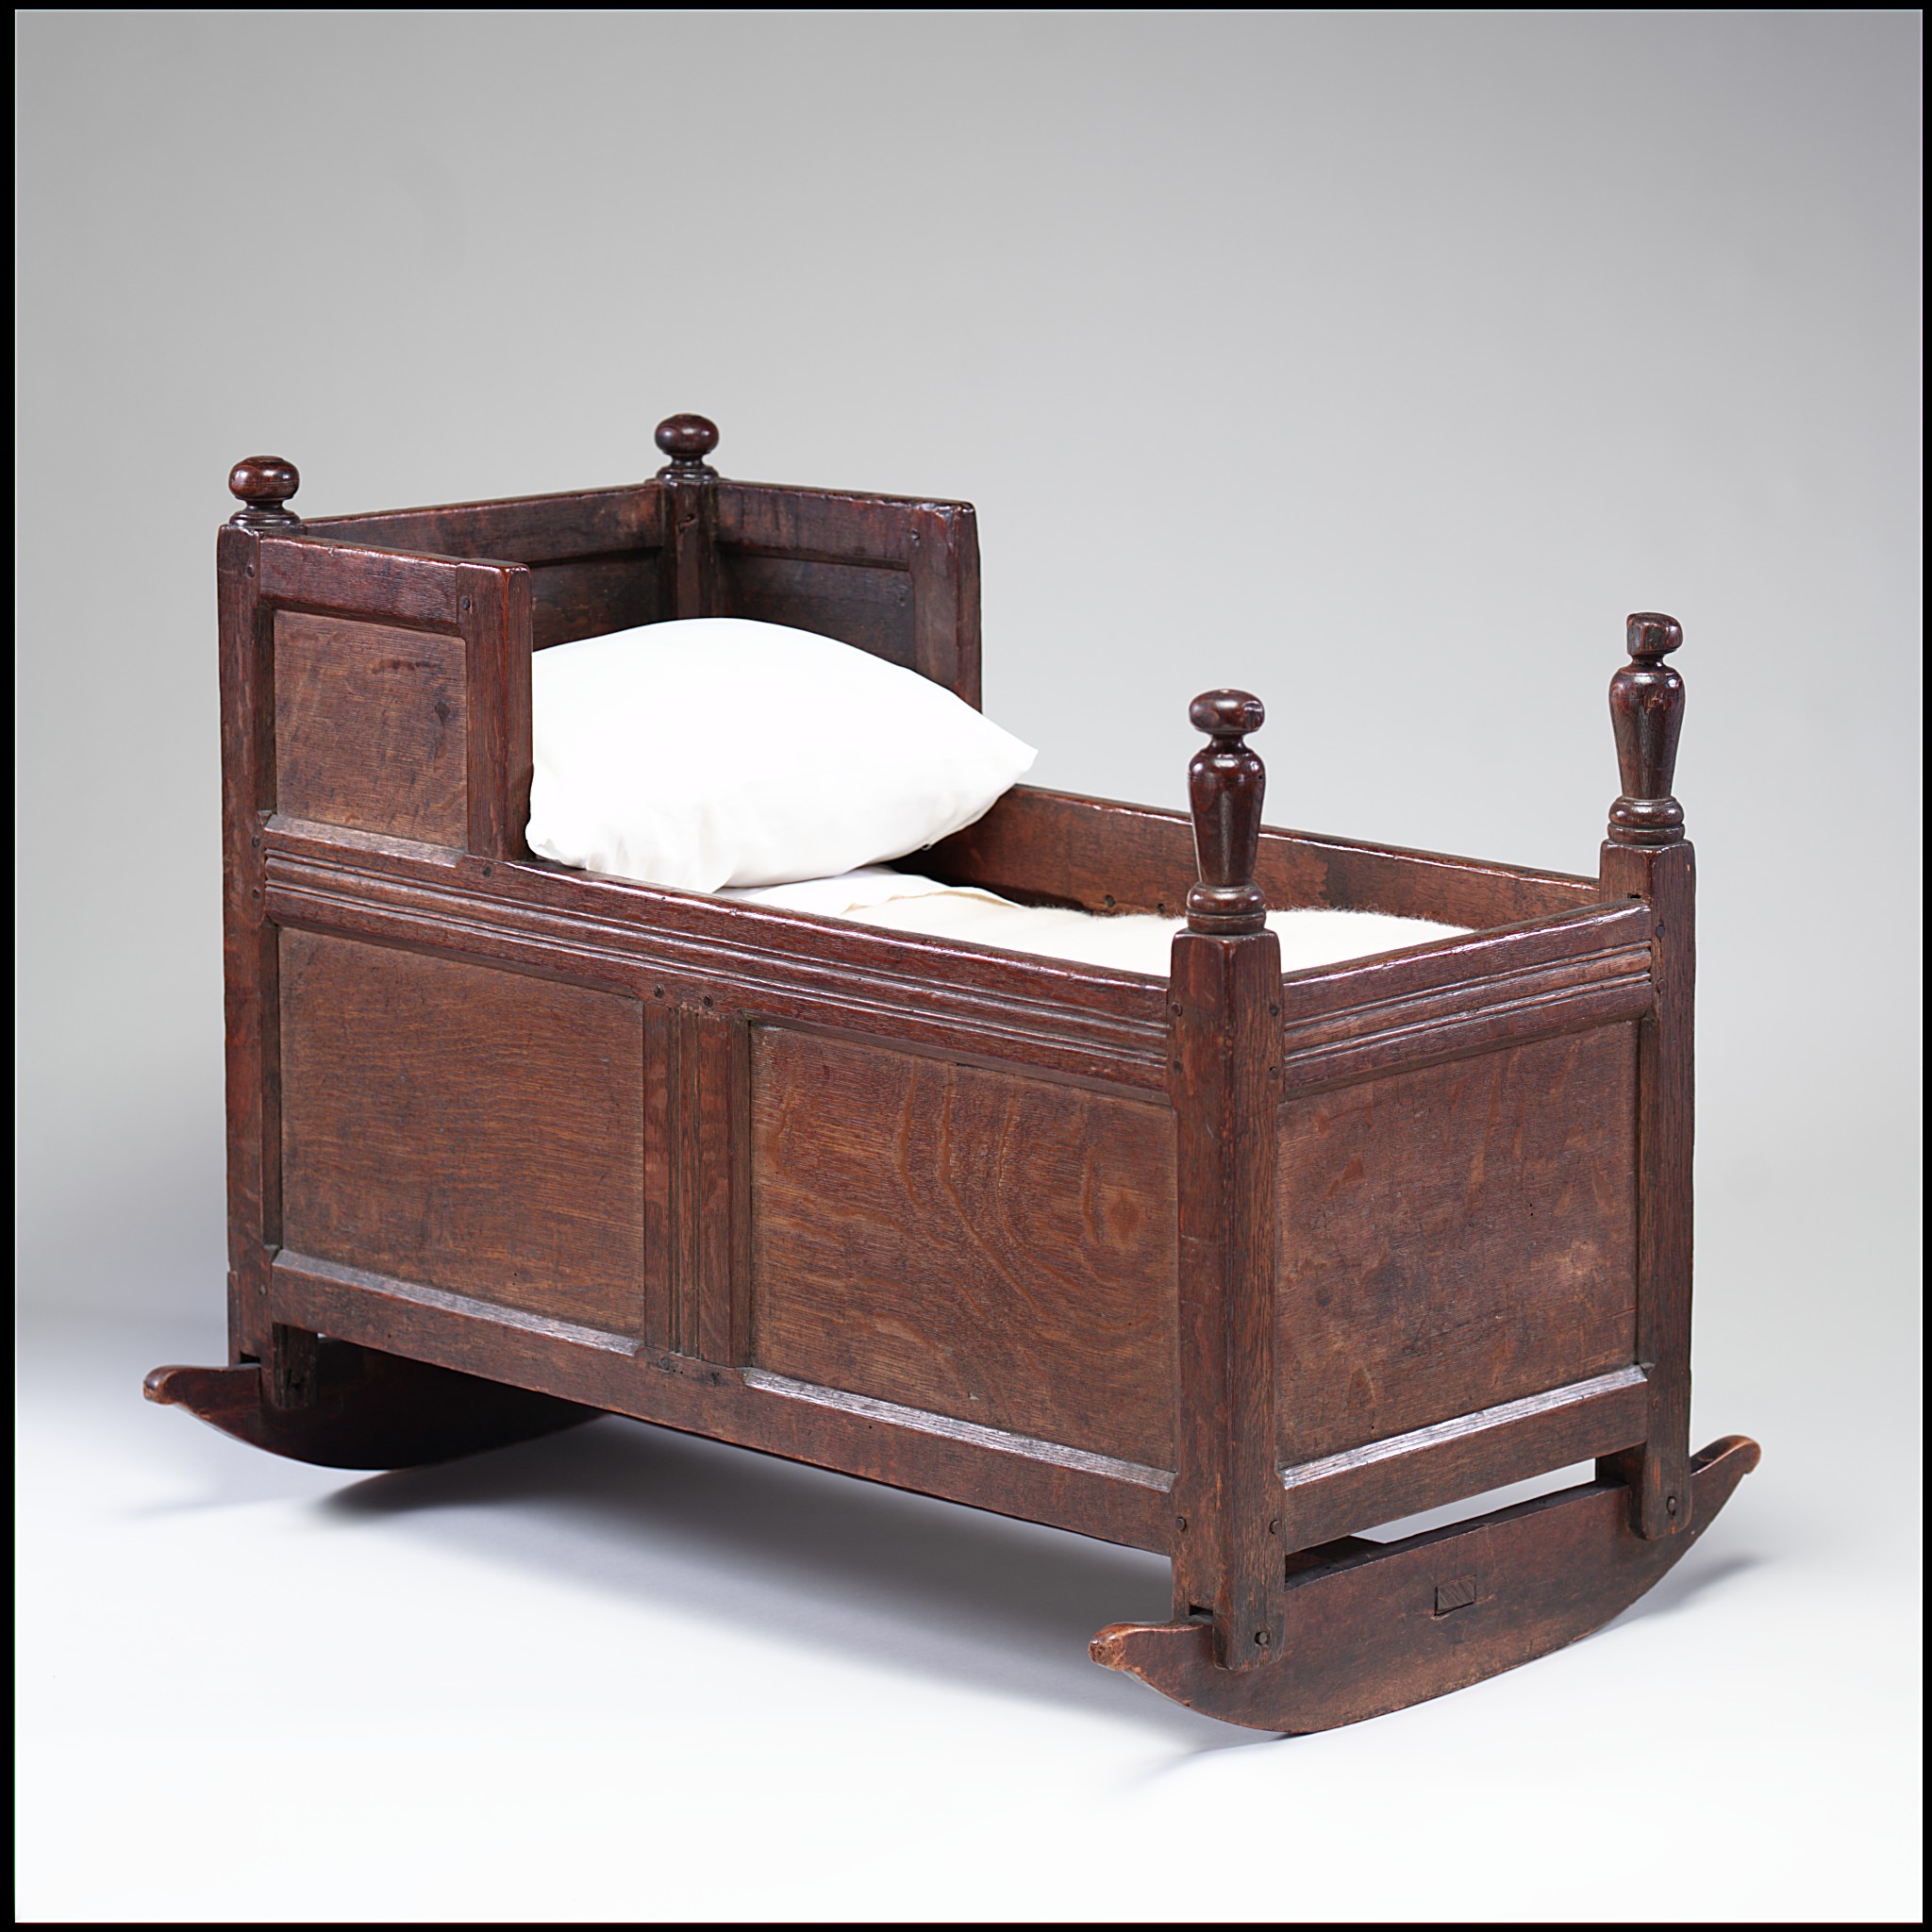 An image of an antique American cradle with solid wooden sides and a white pillow.